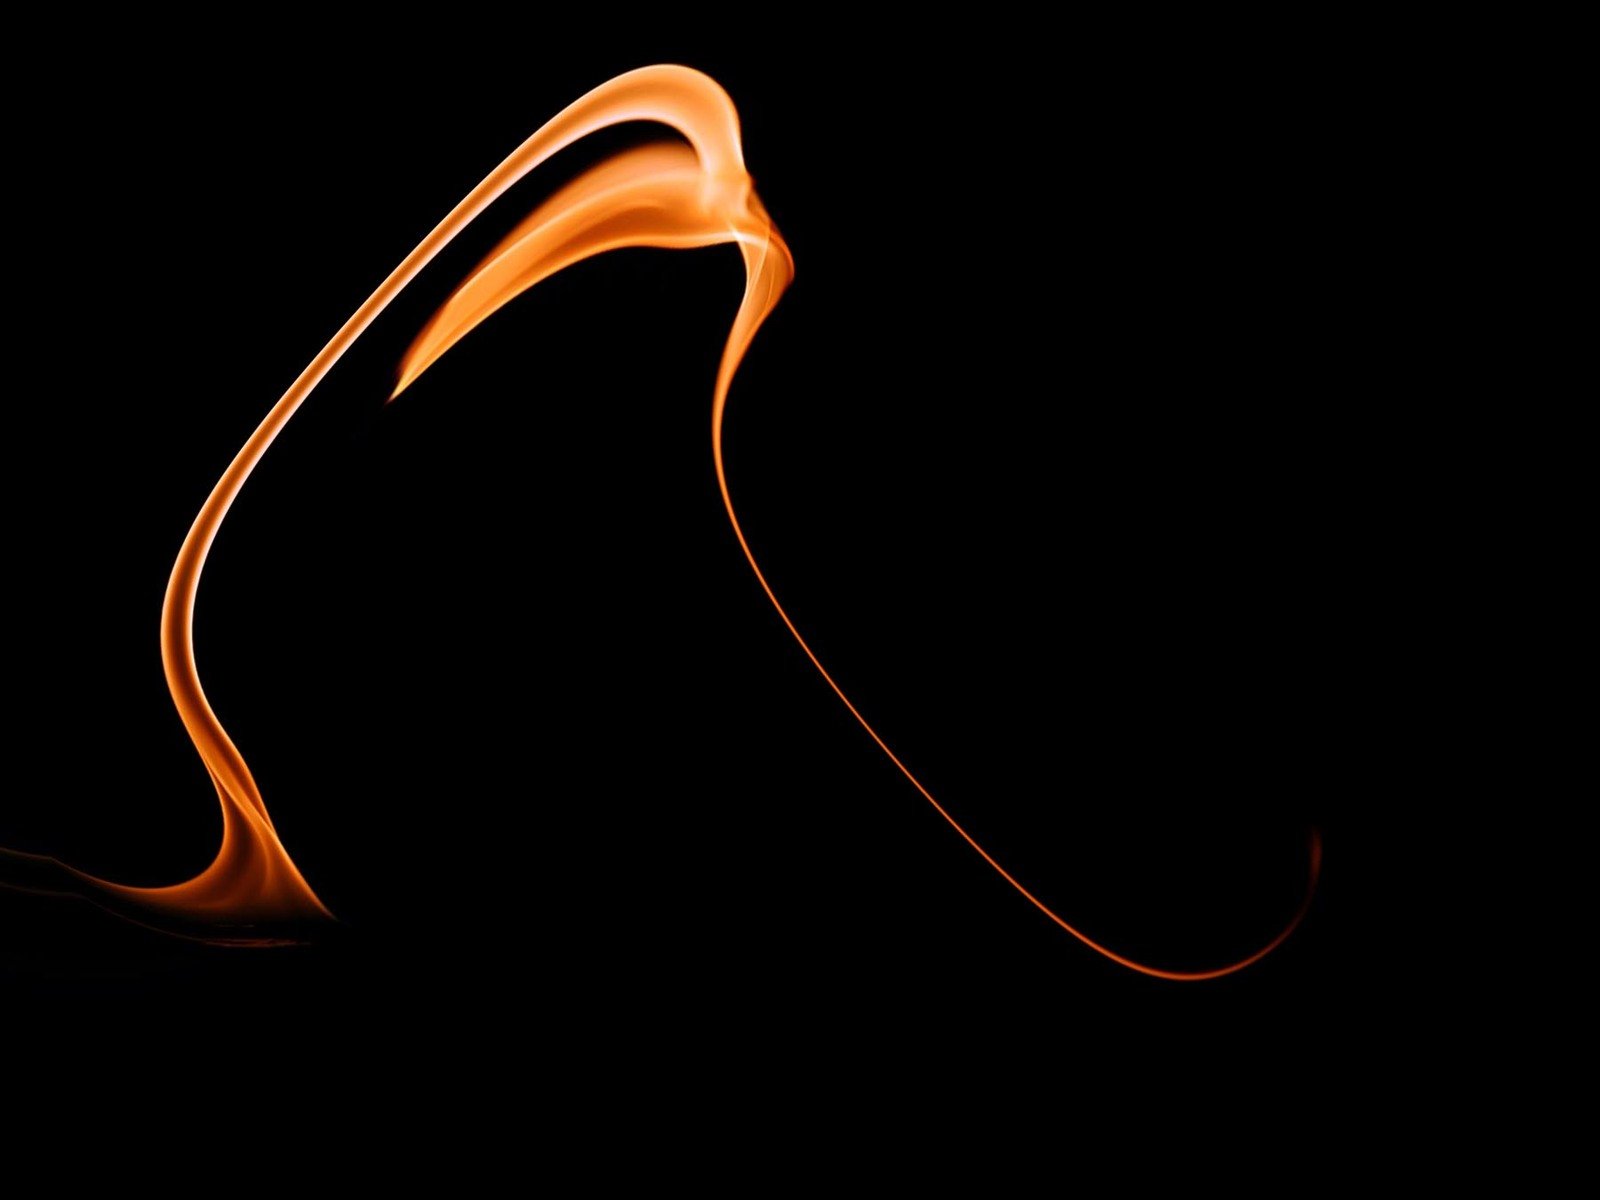 a computer screen showing the shape of fire